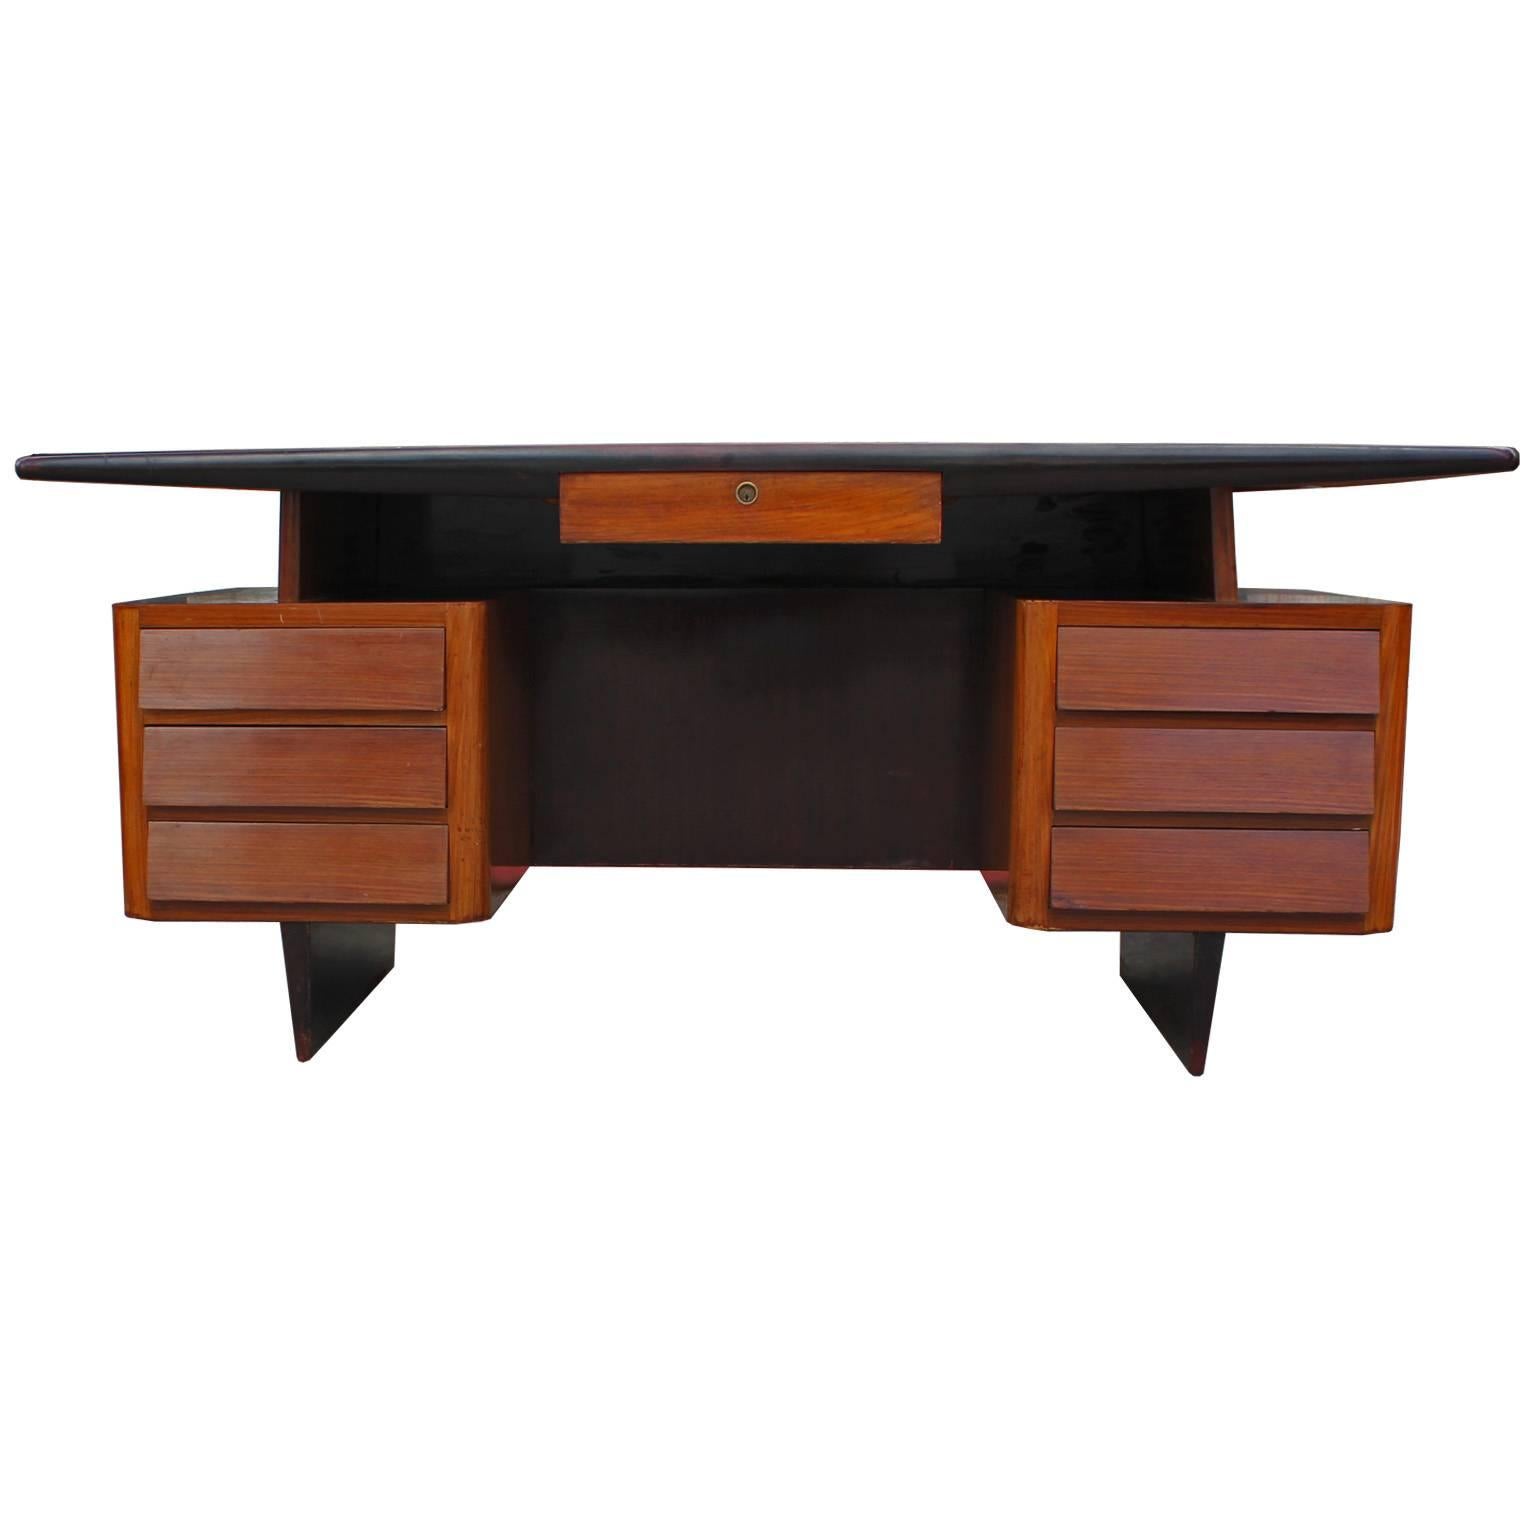 Fabulous executive desk in a two-tone finish. Sleek black glass desk top nicely contrasts the warm rosewood desk. Seven drawers provide excellent storage. Desk has excellent curved lines. Looks great from all angles. In nice vintage condition.